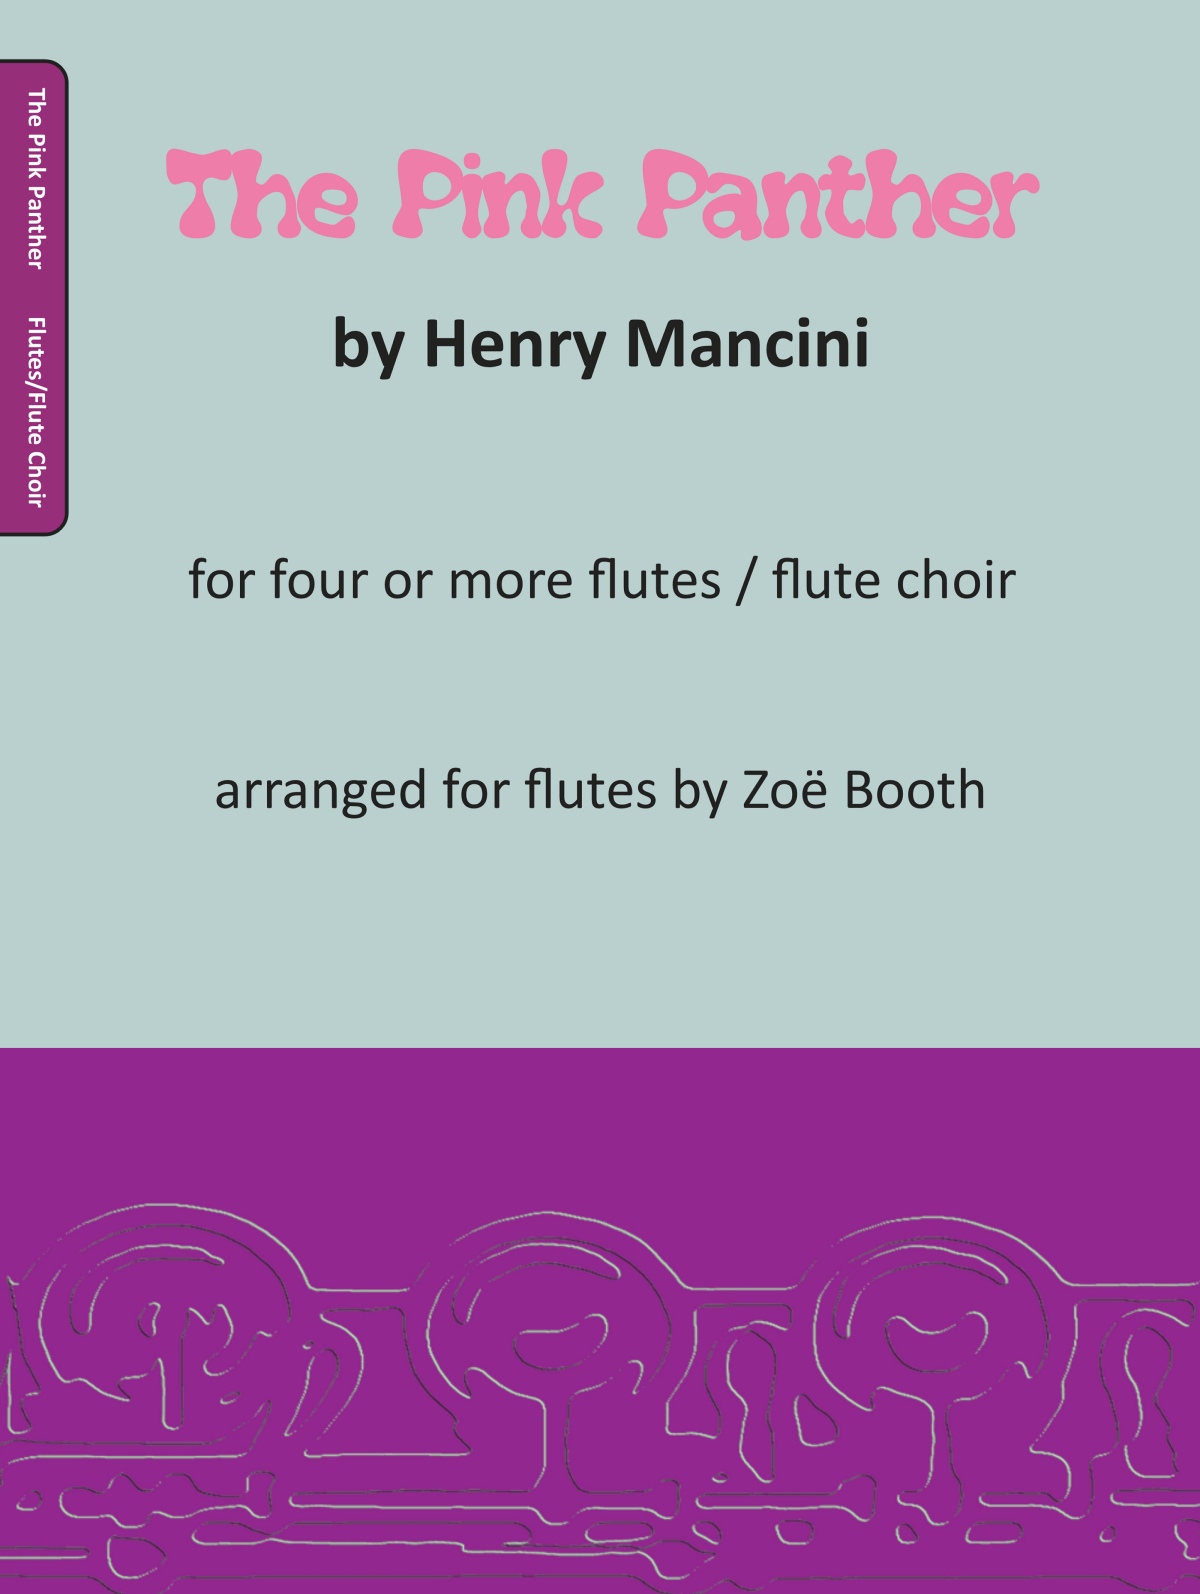 The Pink Panther Theme by Mancini,  arranged by Zoë Booth for four or more flutes/flute choir